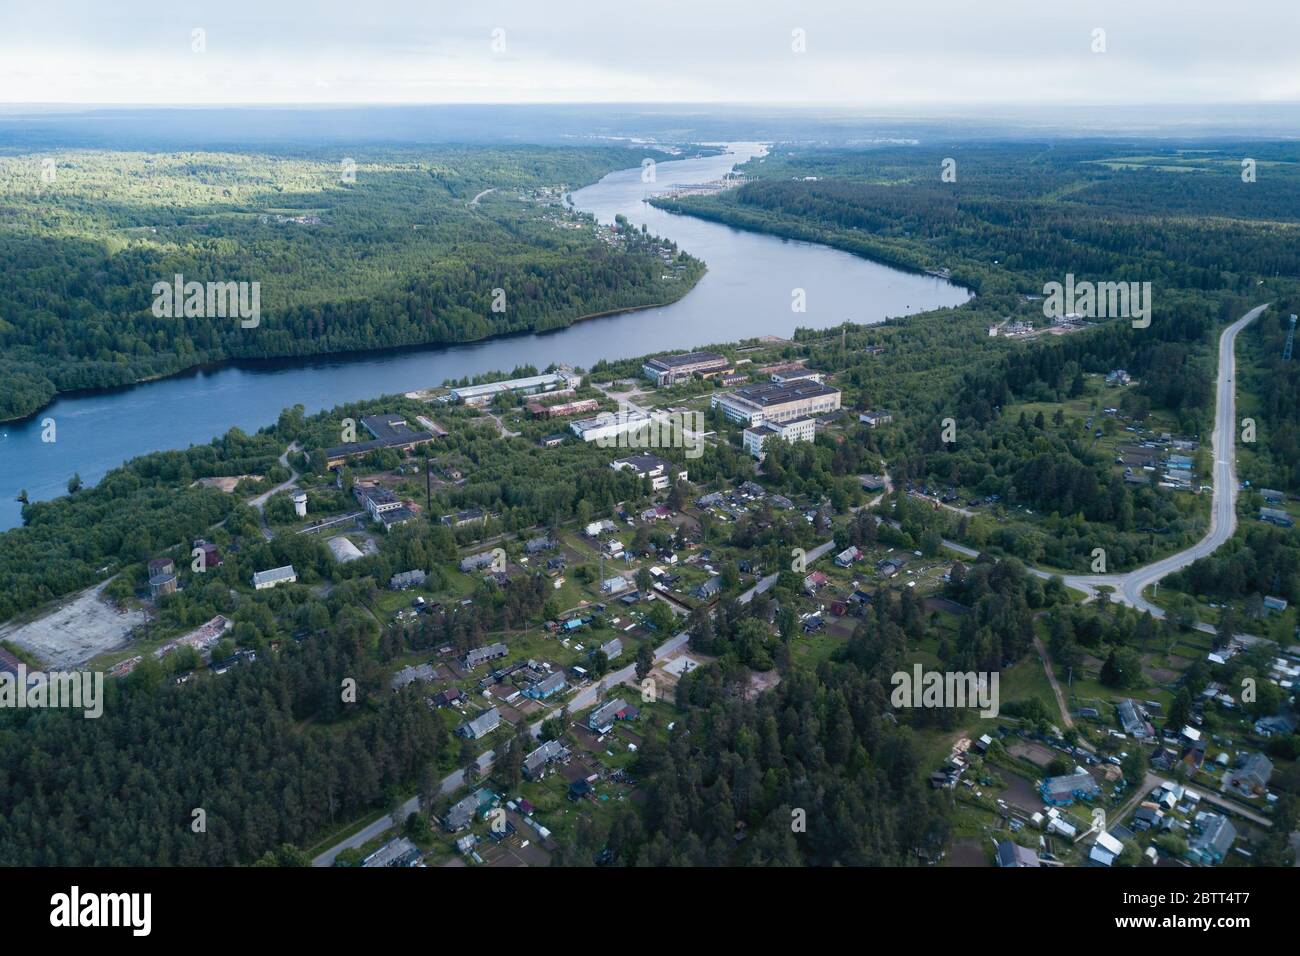 Aerial view of the Svir river and houses in urban-type settlement in Leningrad region, Russia. Stock Photo